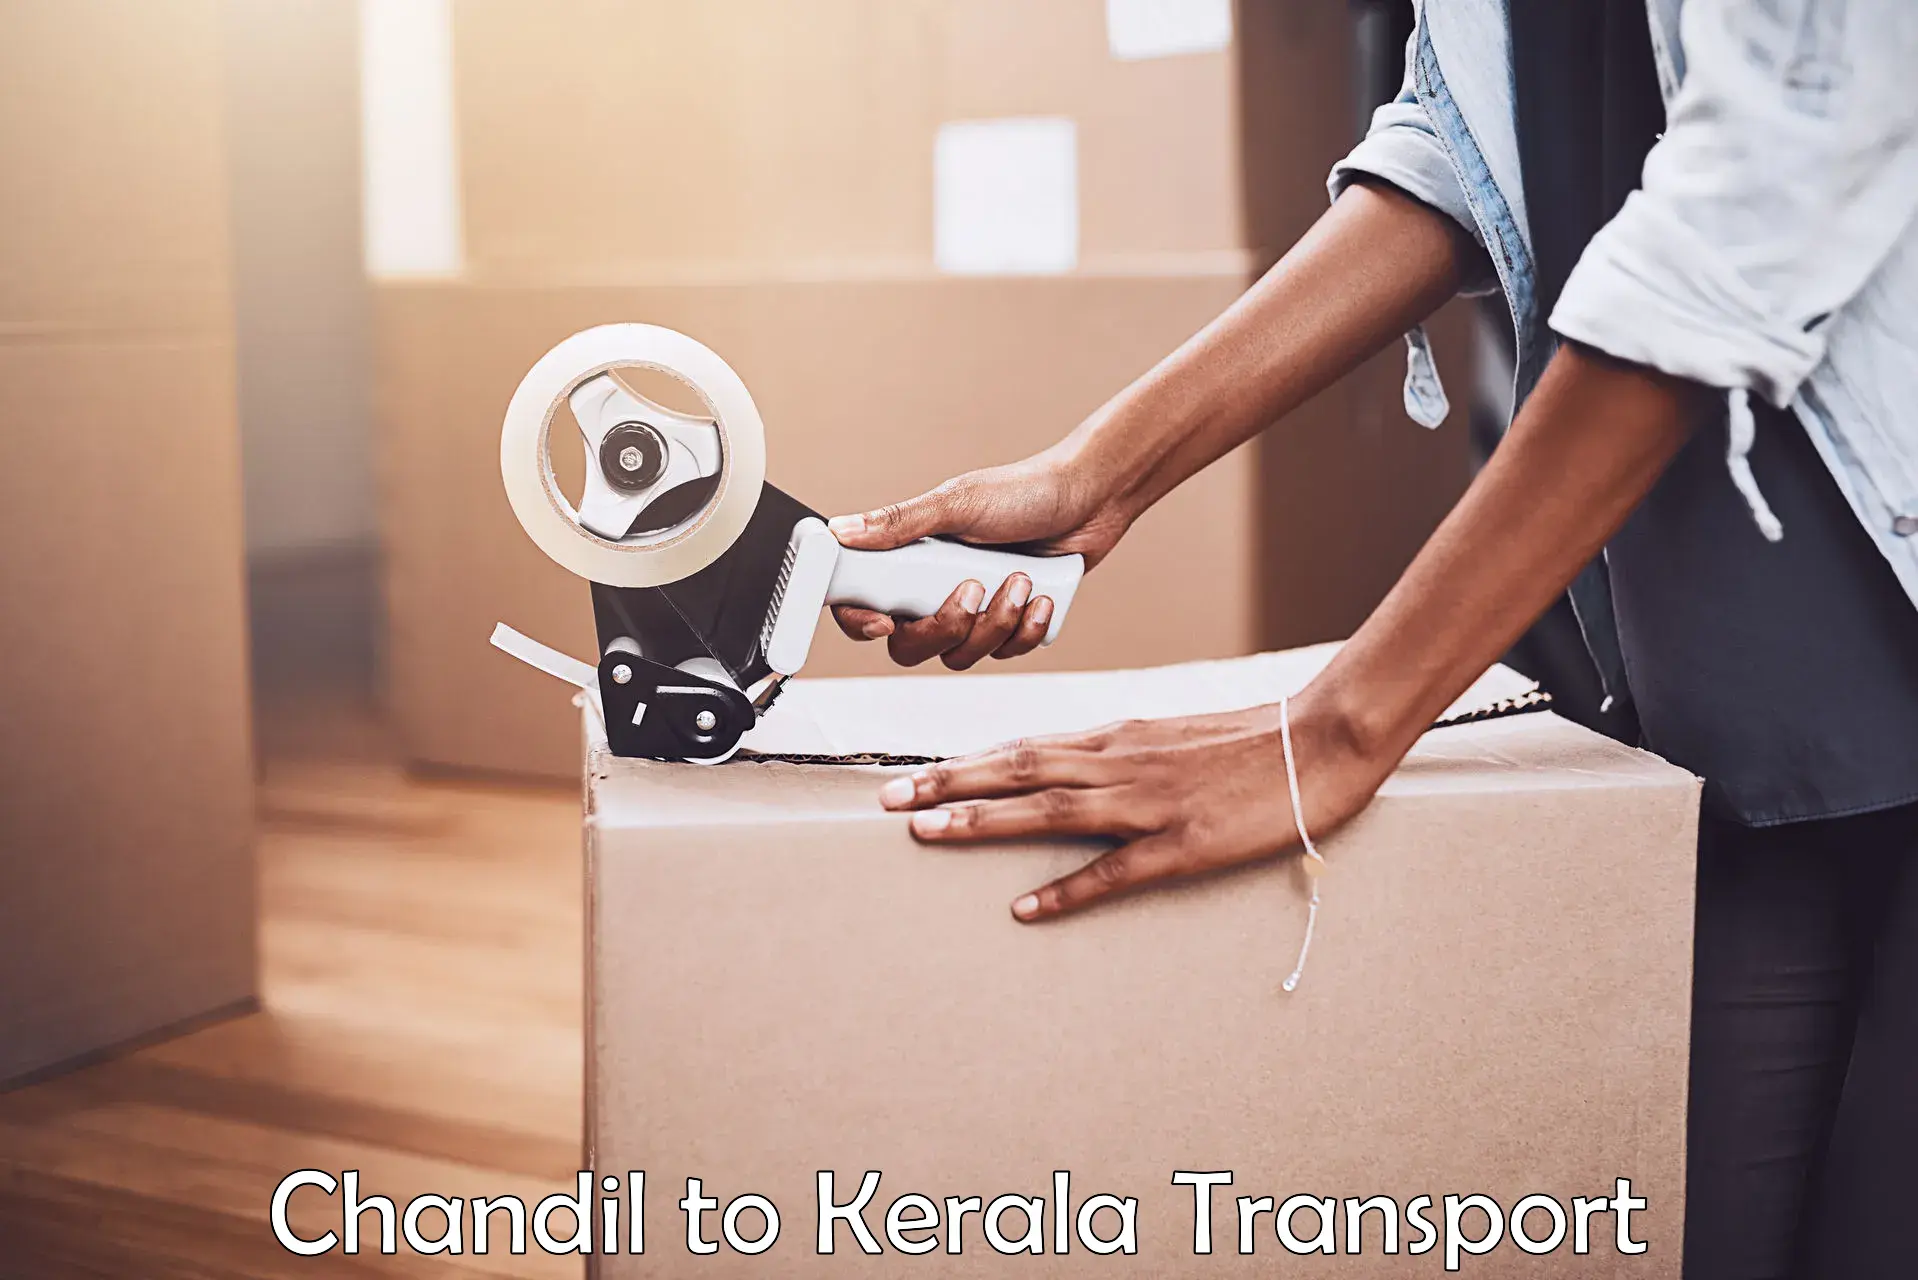 Furniture transport service in Chandil to Kerala